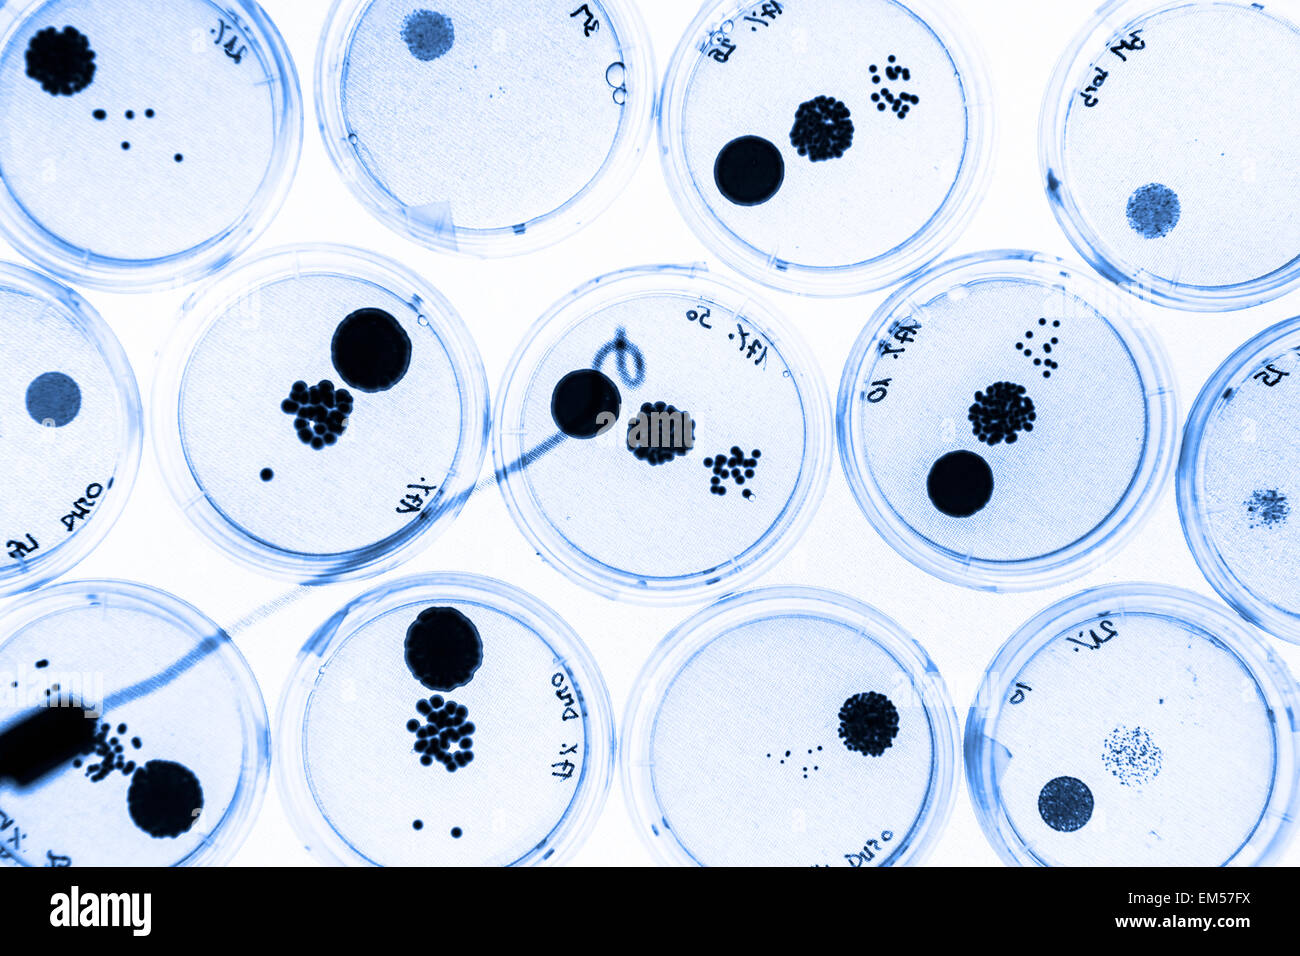 Growing Bacteria in Petri Dishes. Stock Photo